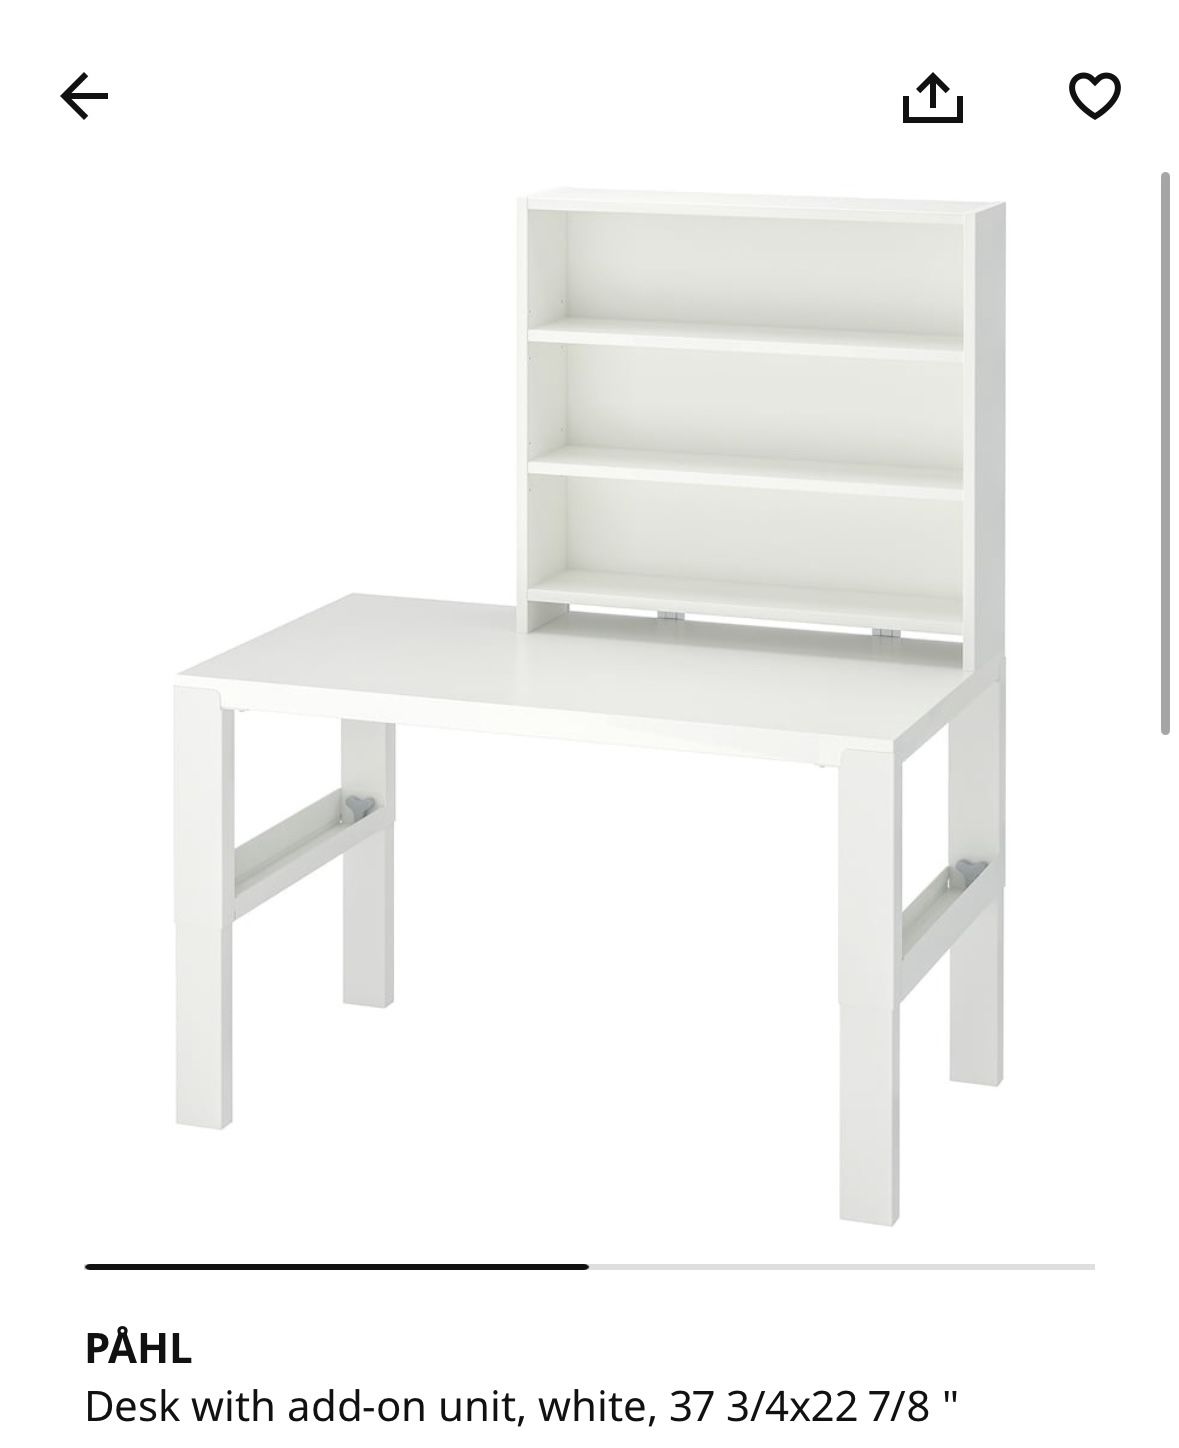 IKEA Kid Desk And Chair